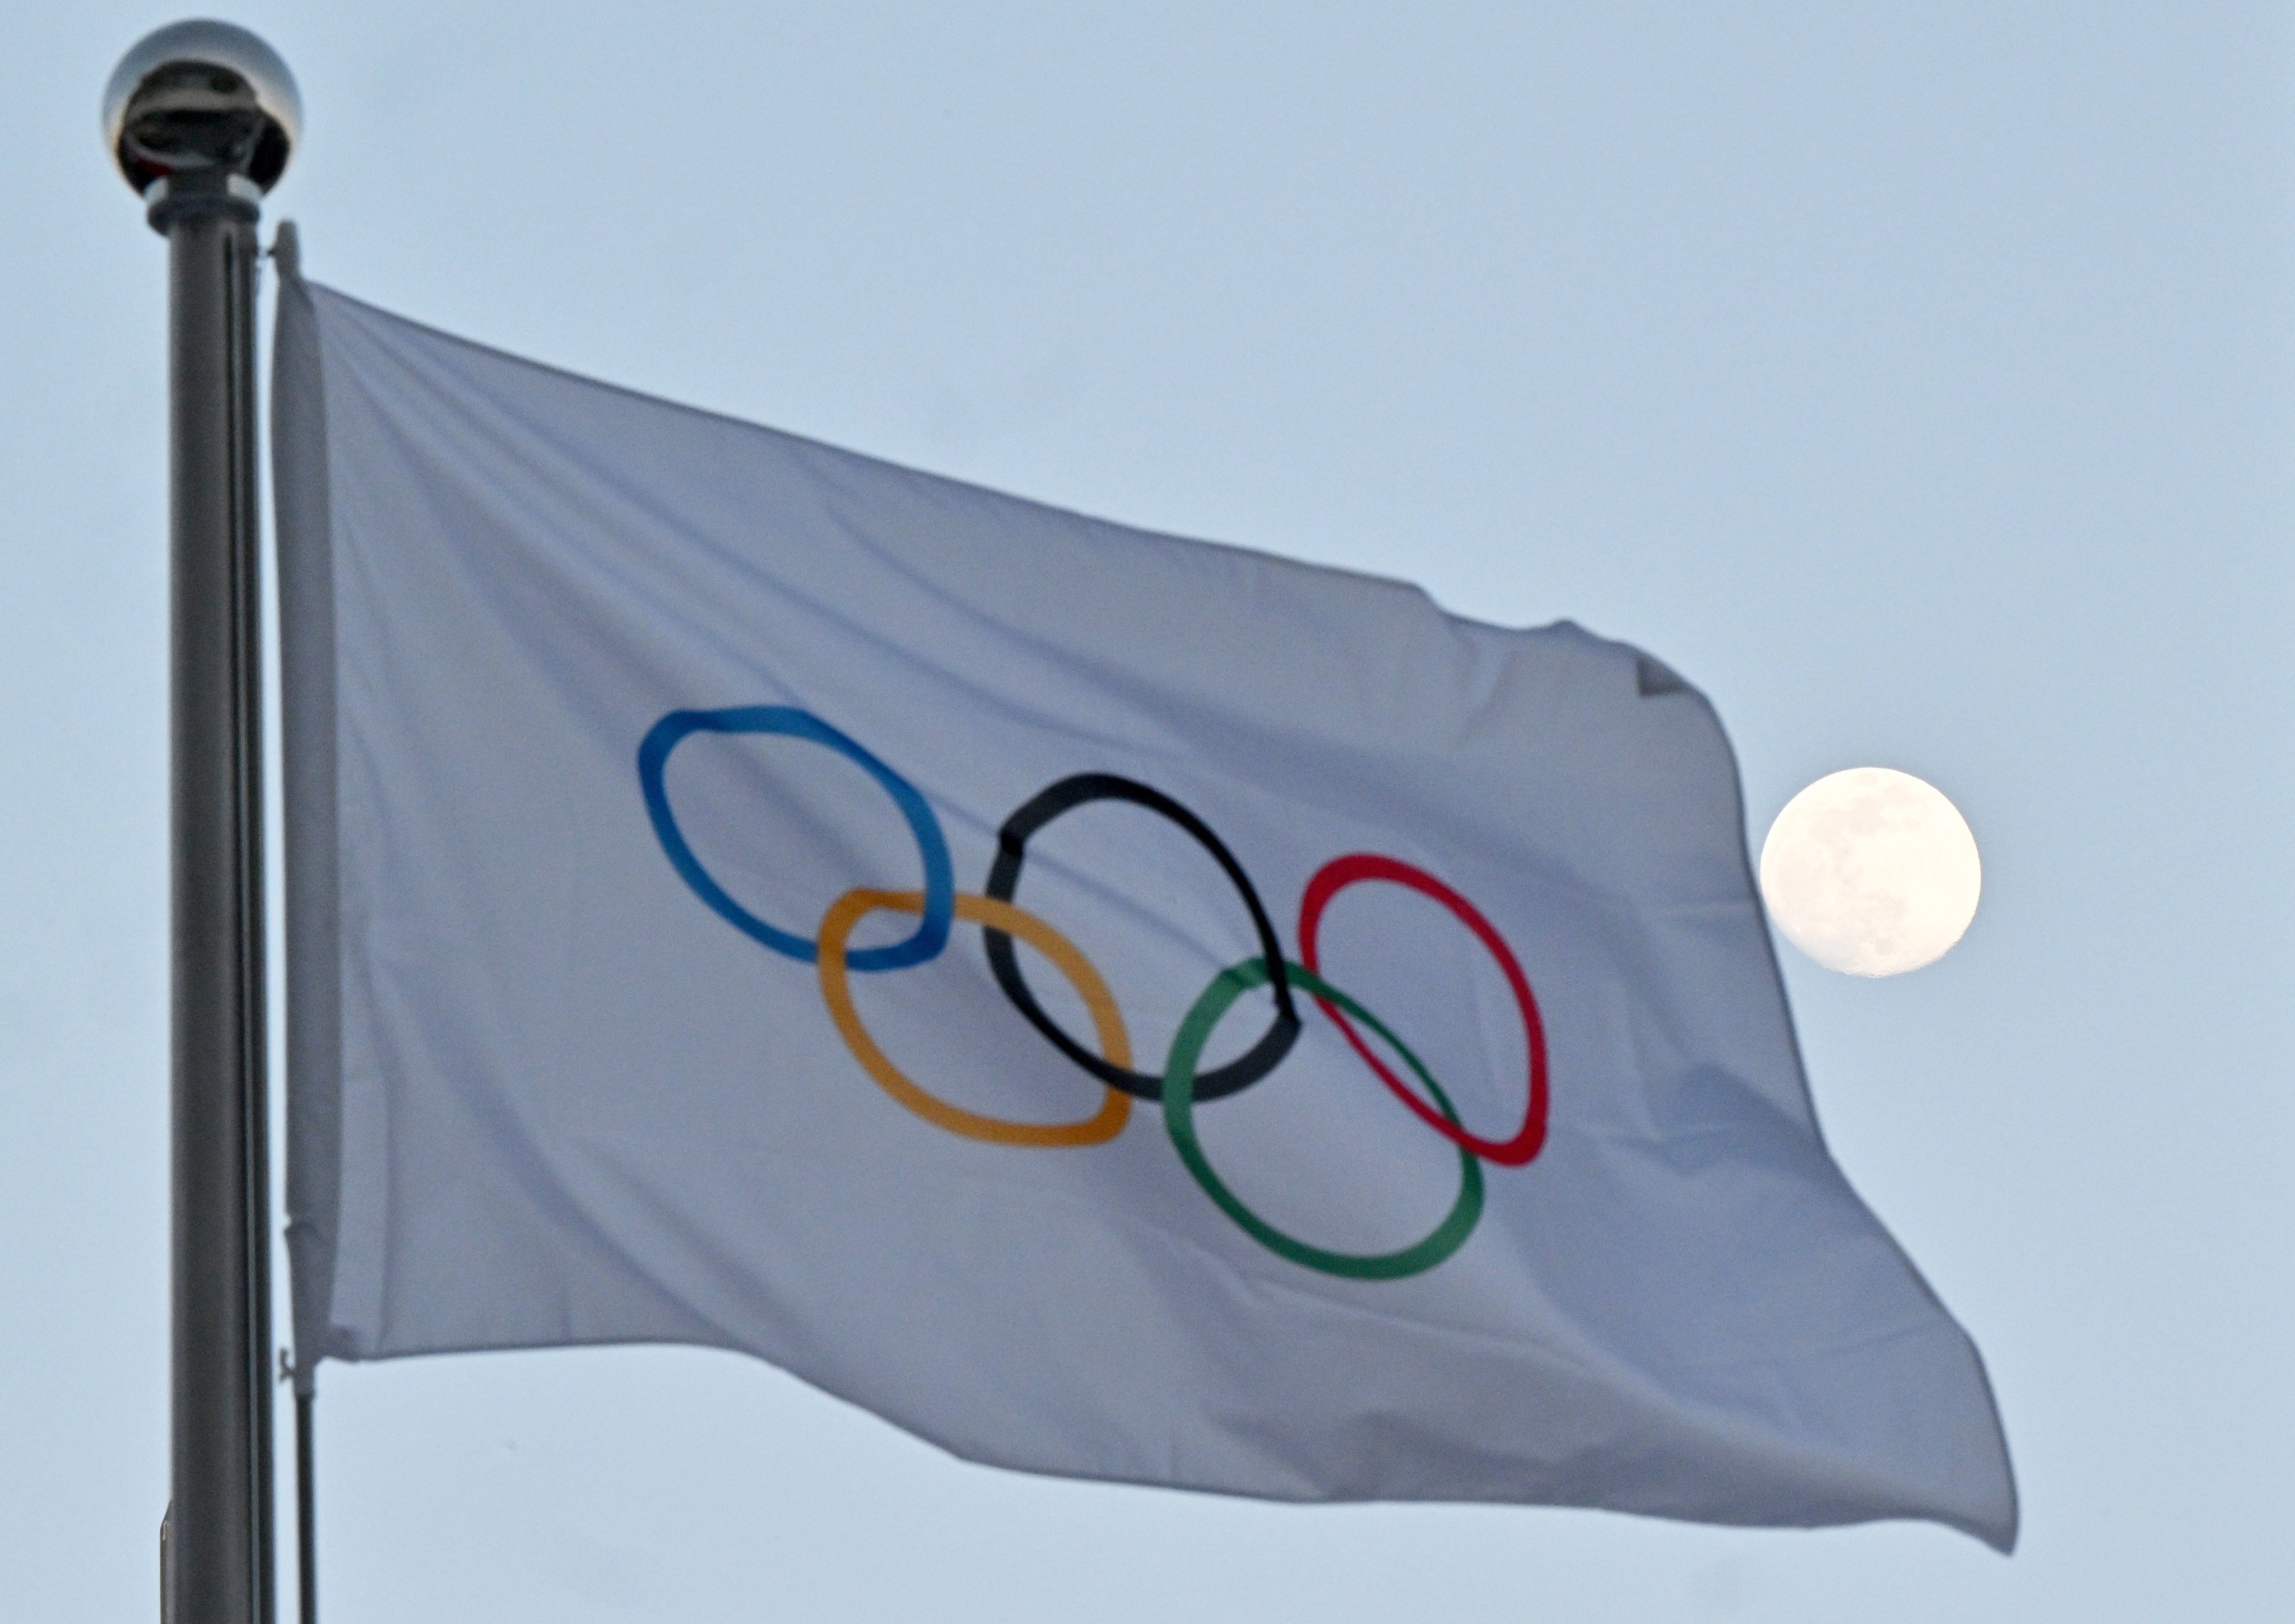 The International Olympic Committee decided in June to strip the IBA of recognition over its failure to complete reforms on governance, finance and ethical issues. Photo: dpa